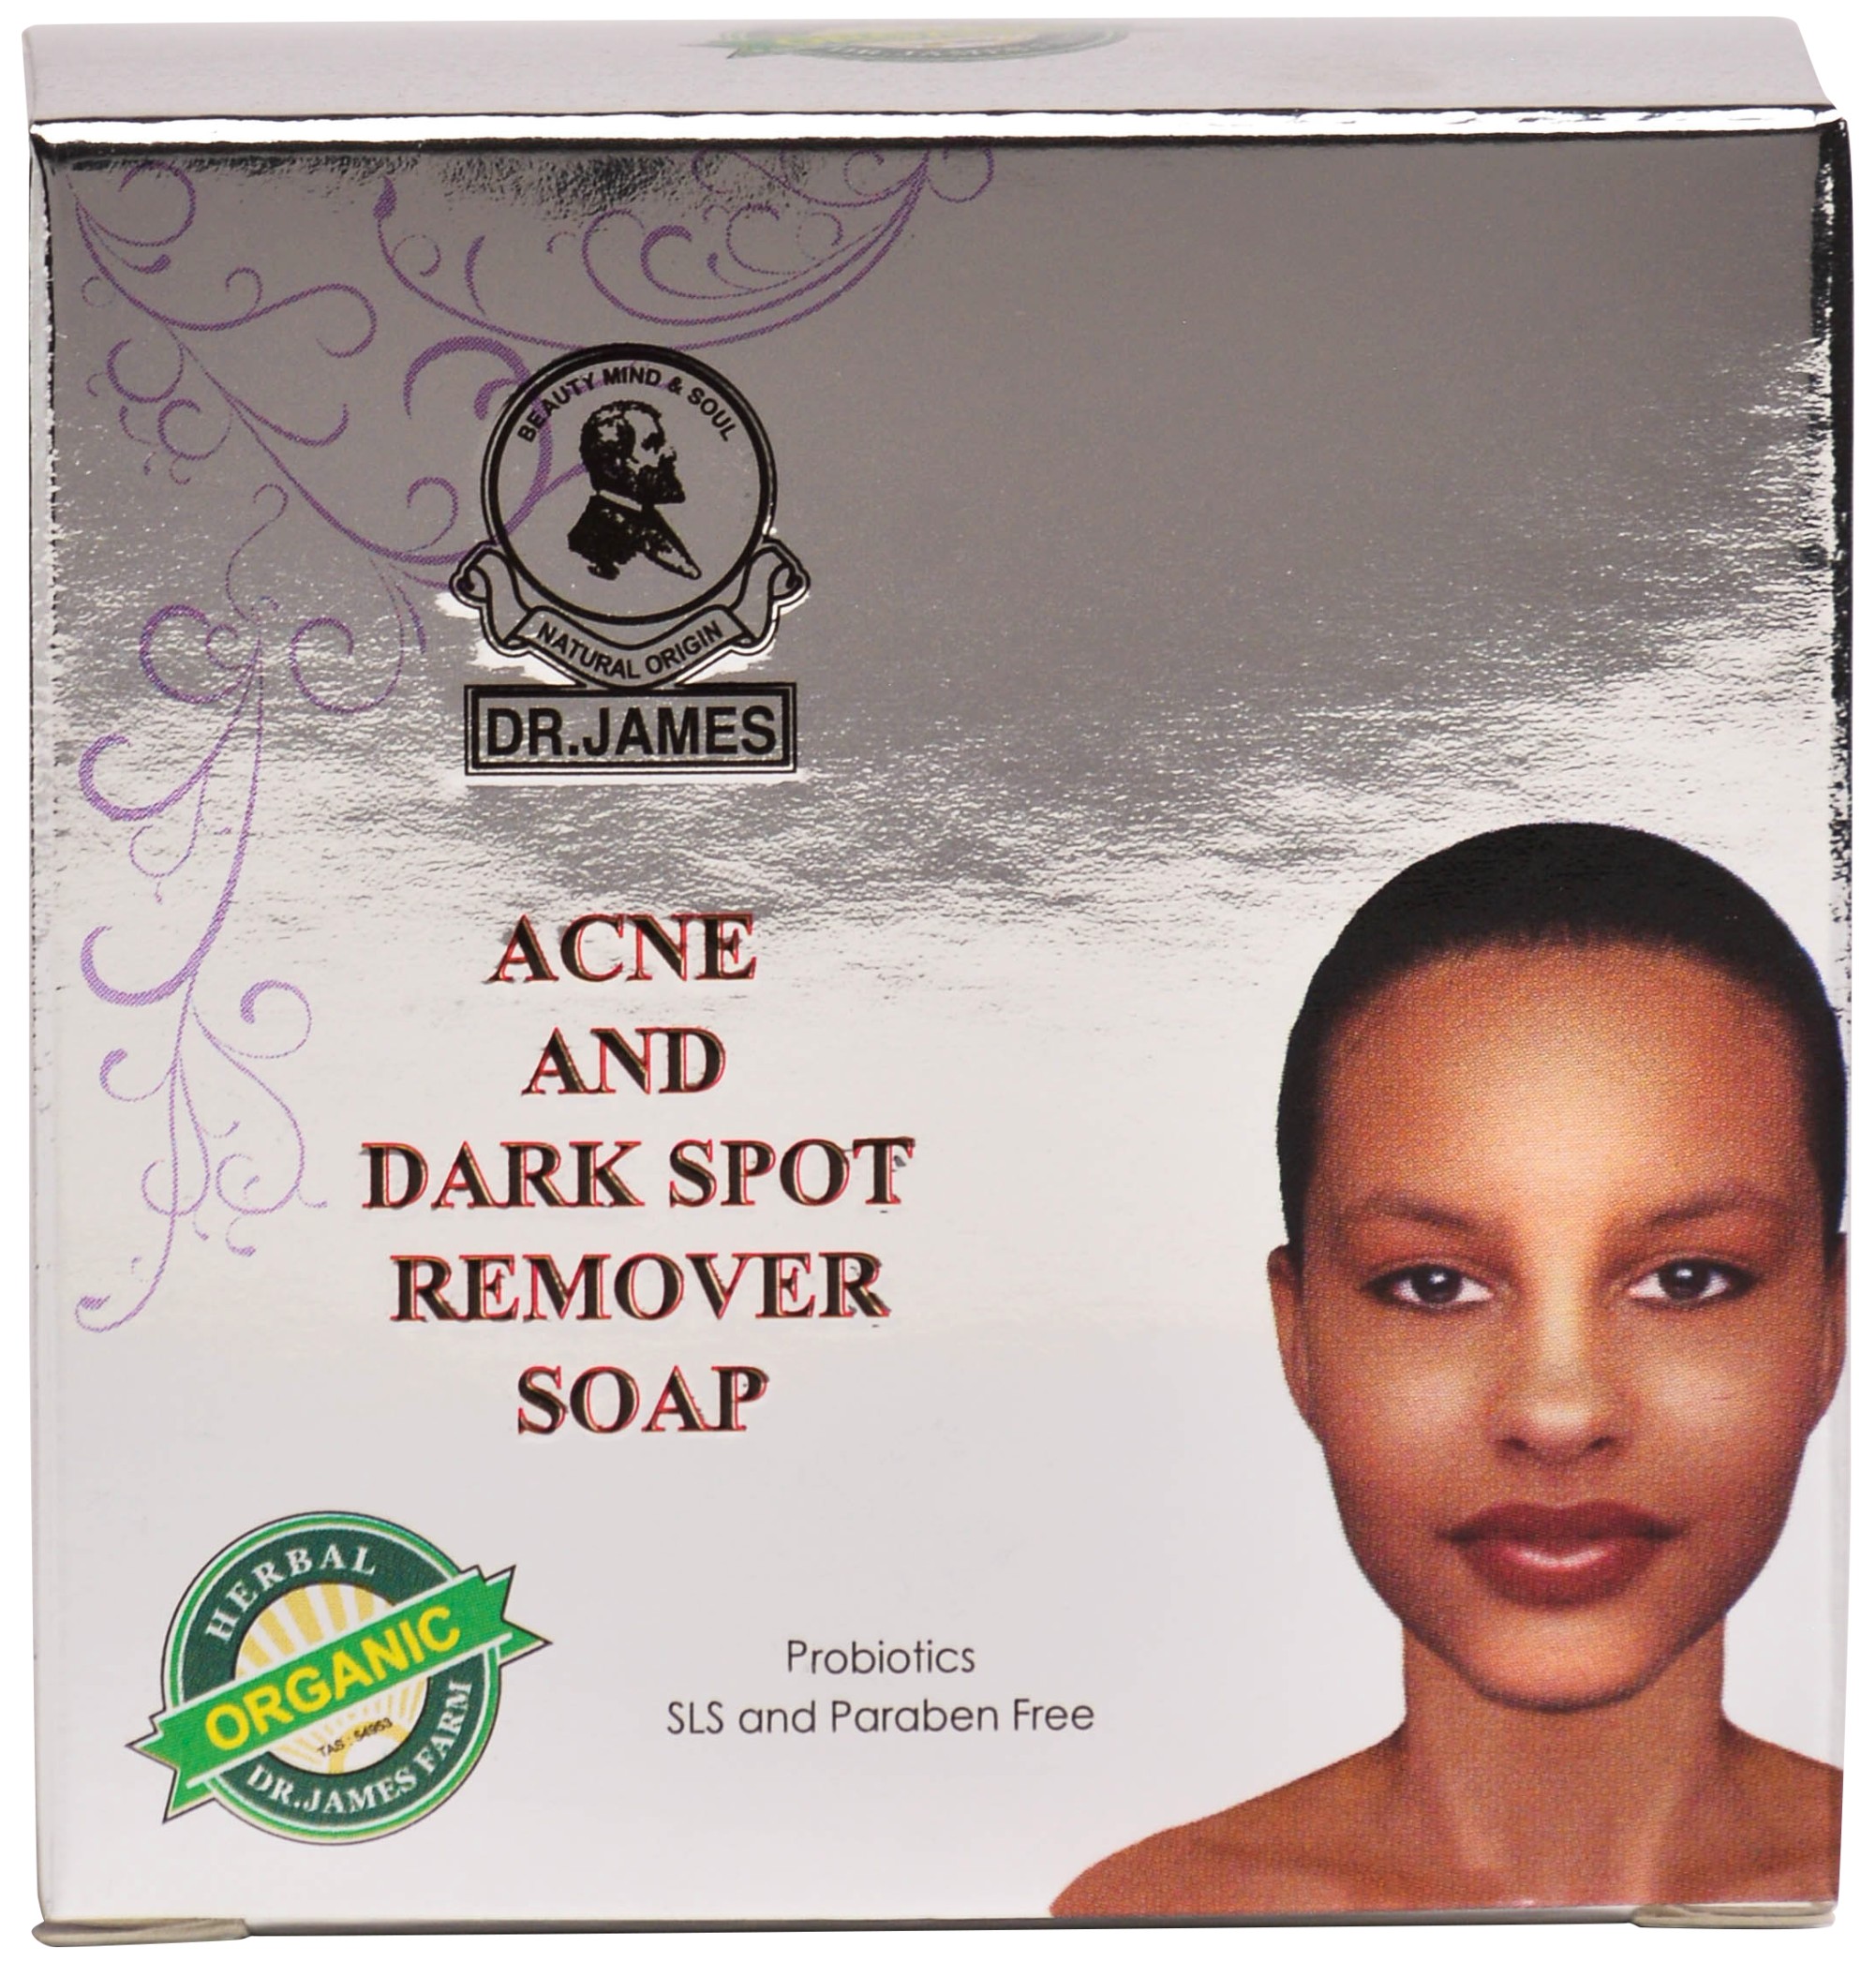 ( S27 ) DR.JAMES ACNE AND DARK SPOT REMOVER SOAP 80g.